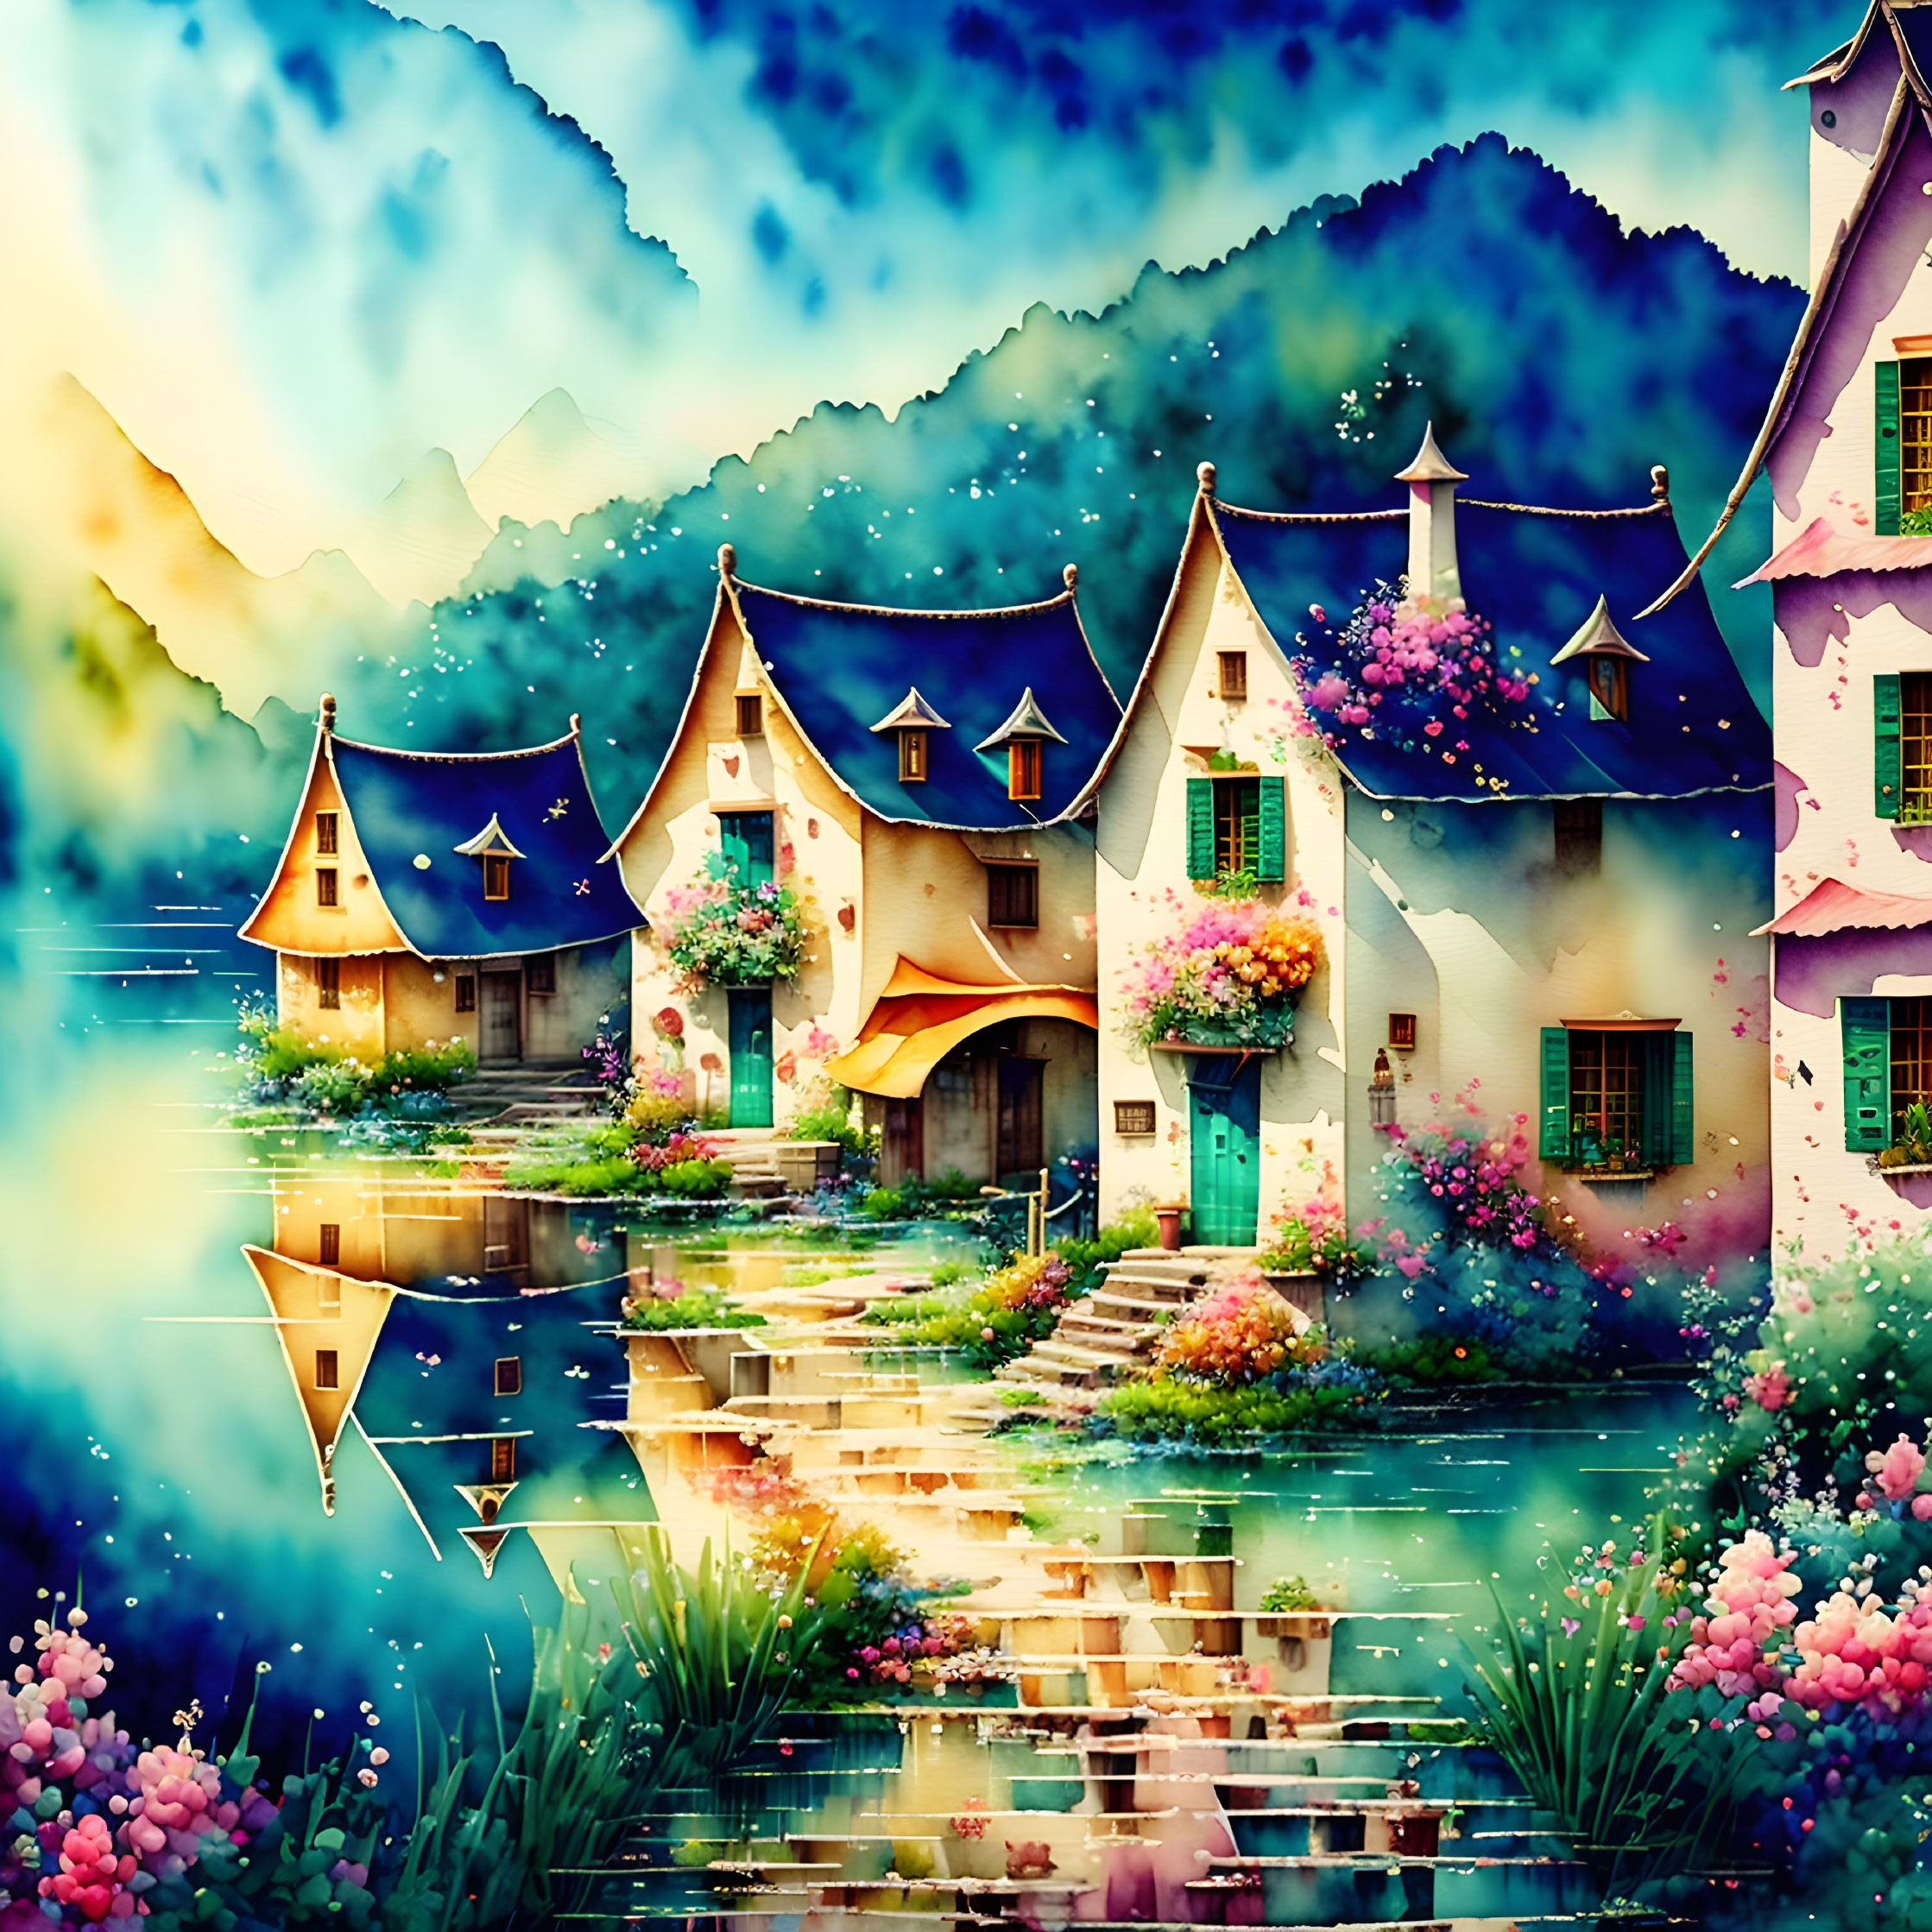 Vibrant village illustration with charming houses, flowers, and mountains